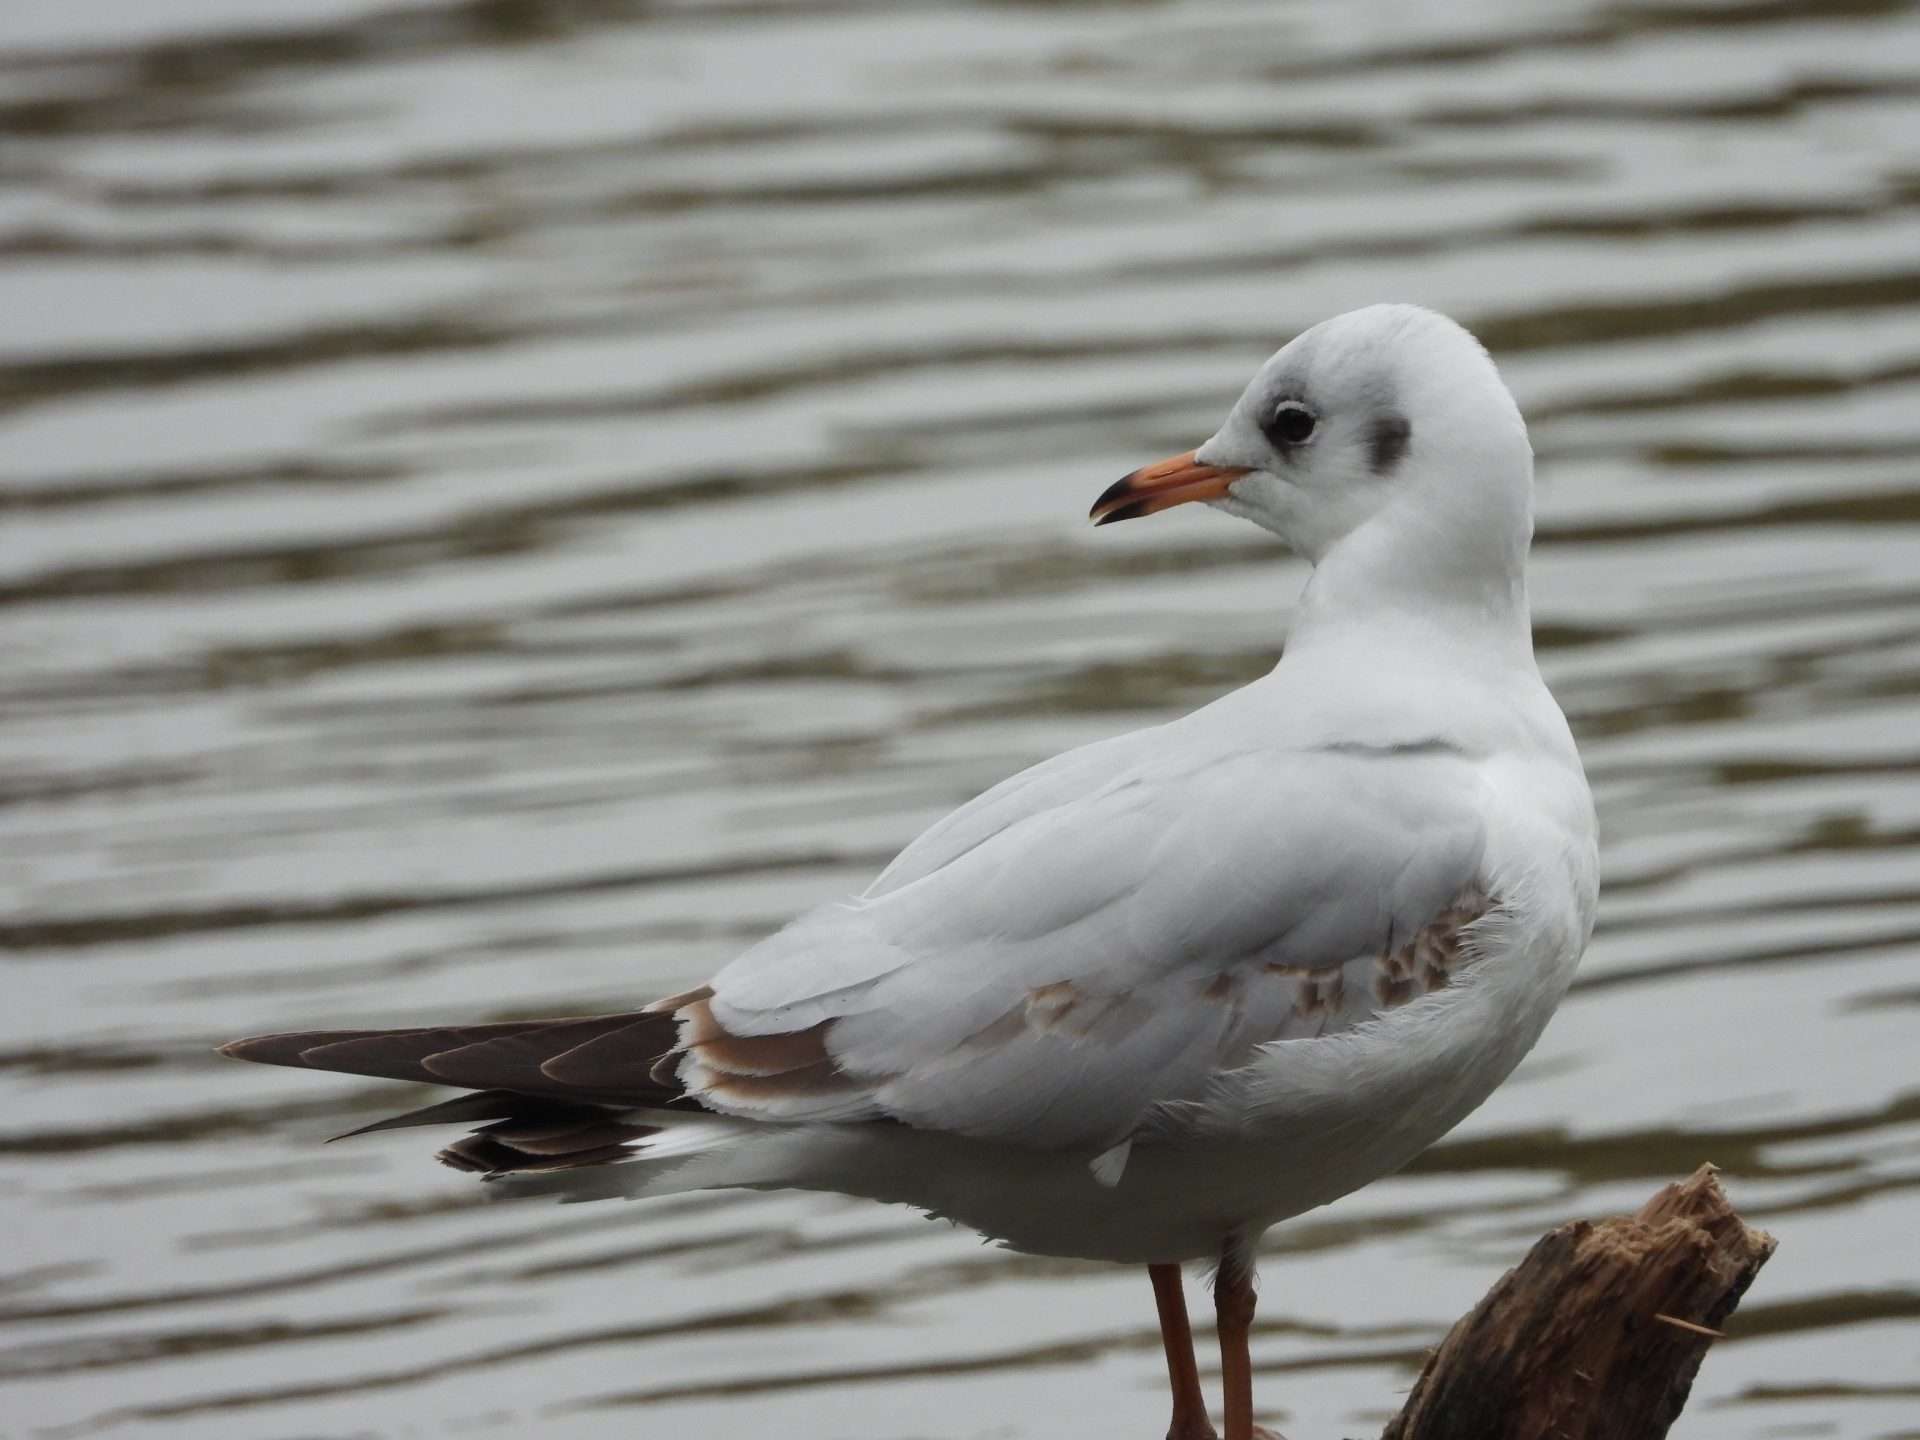 Black headed gull by Kenneth Bradley at Stover